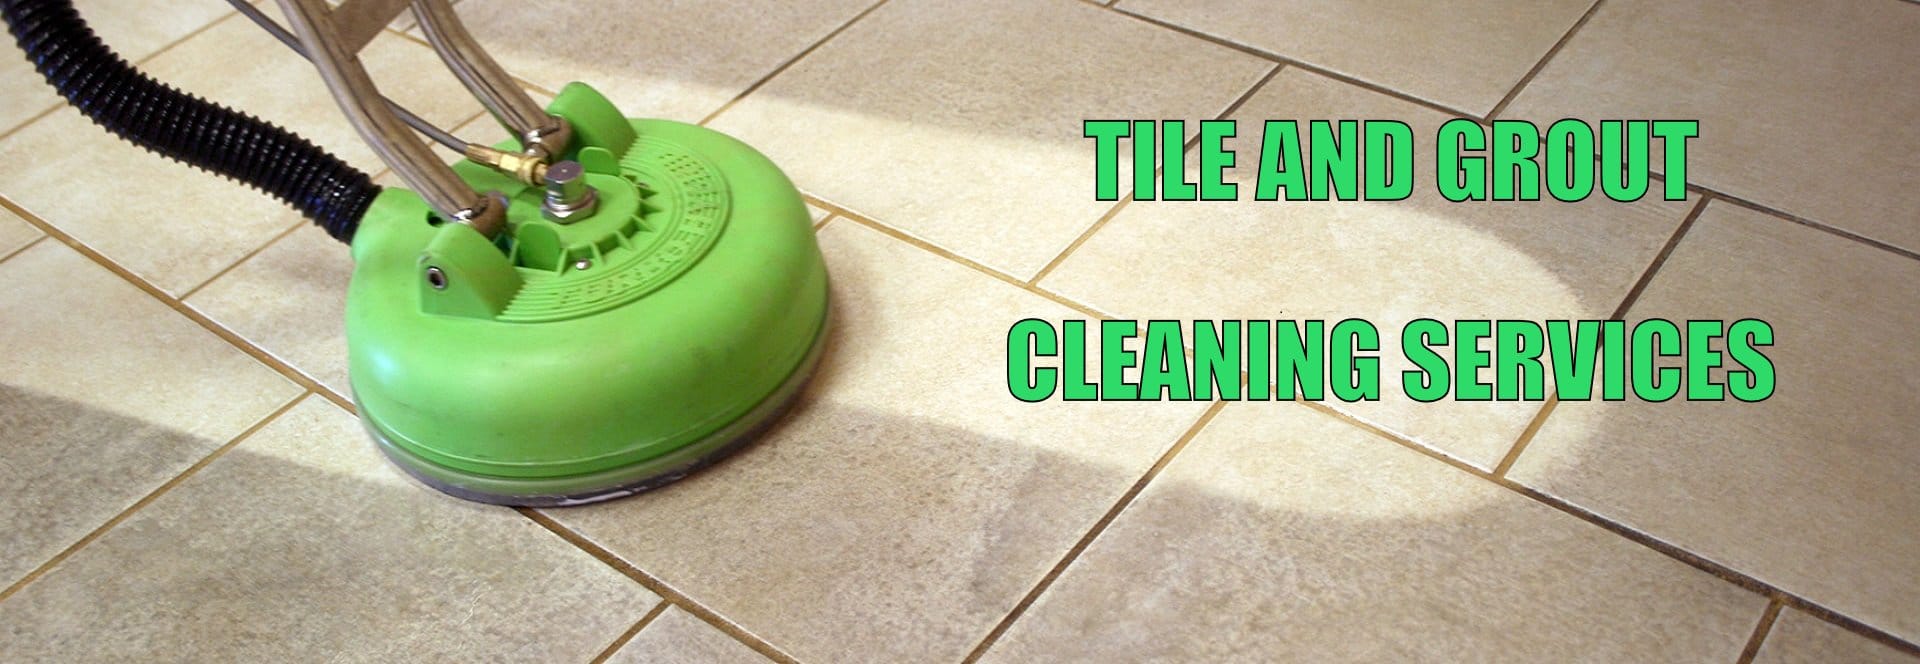 Tile and Grout Cleaning Vancouver